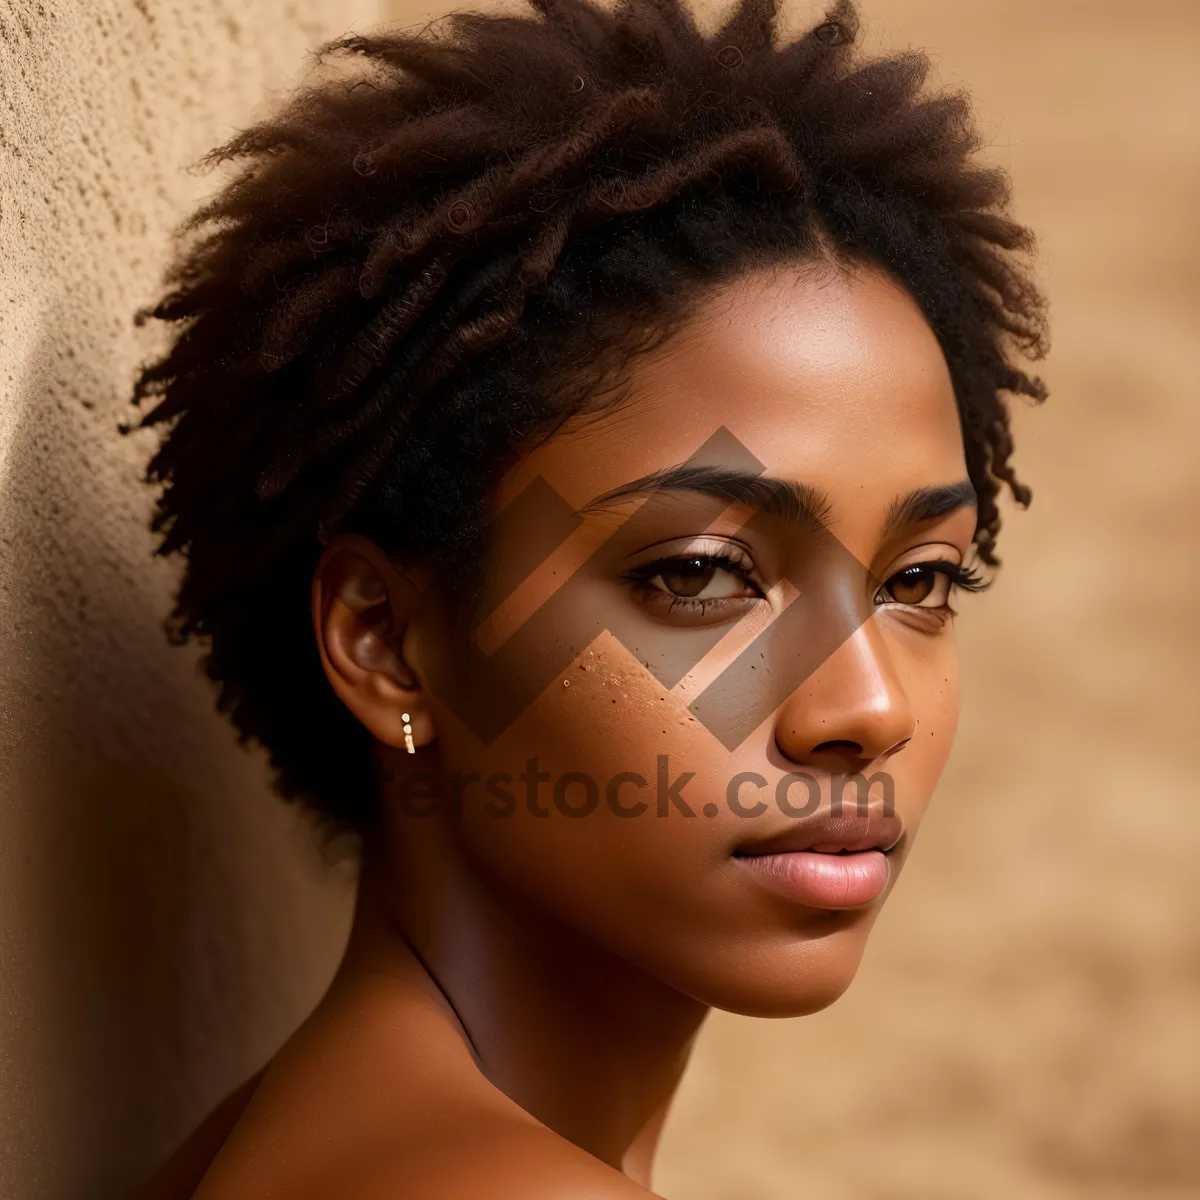 Picture of Stunning Afro-Brutus Beauty with Captivating Smile